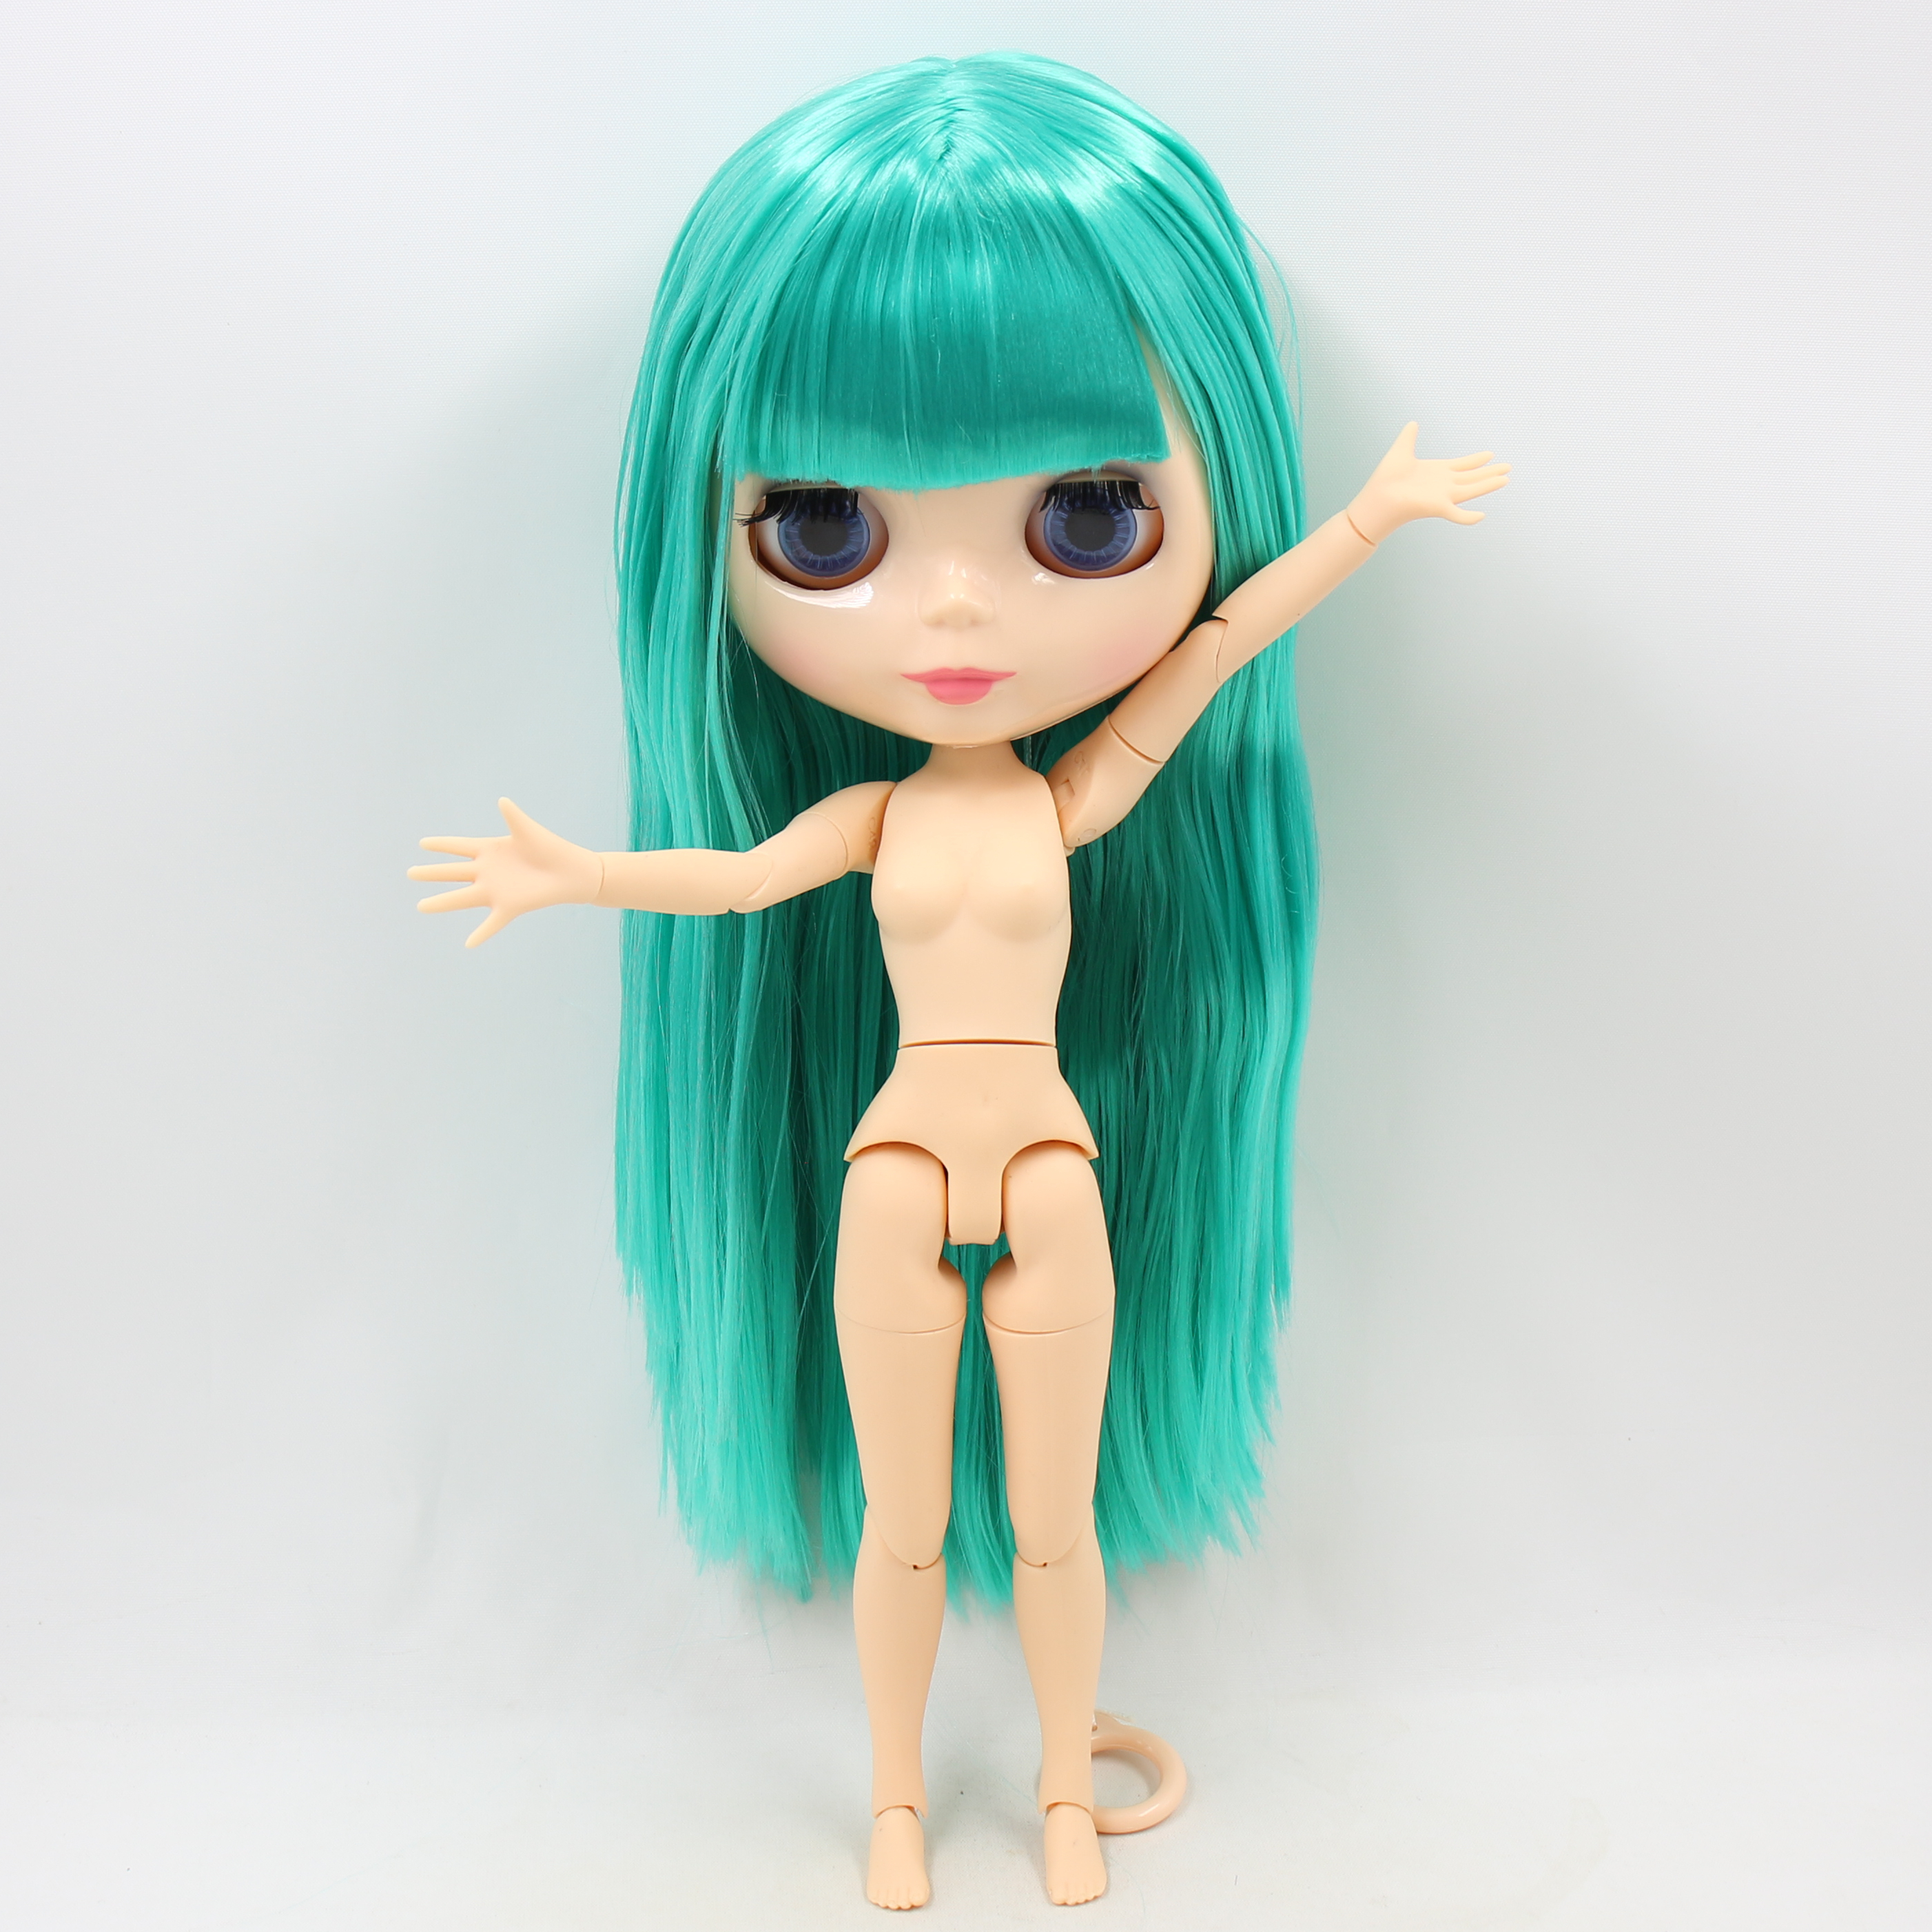 ICY DBS Blyth doll toy 30cm 1/6 bjd natural skin joint body shiny face articulated doll random eyes colors